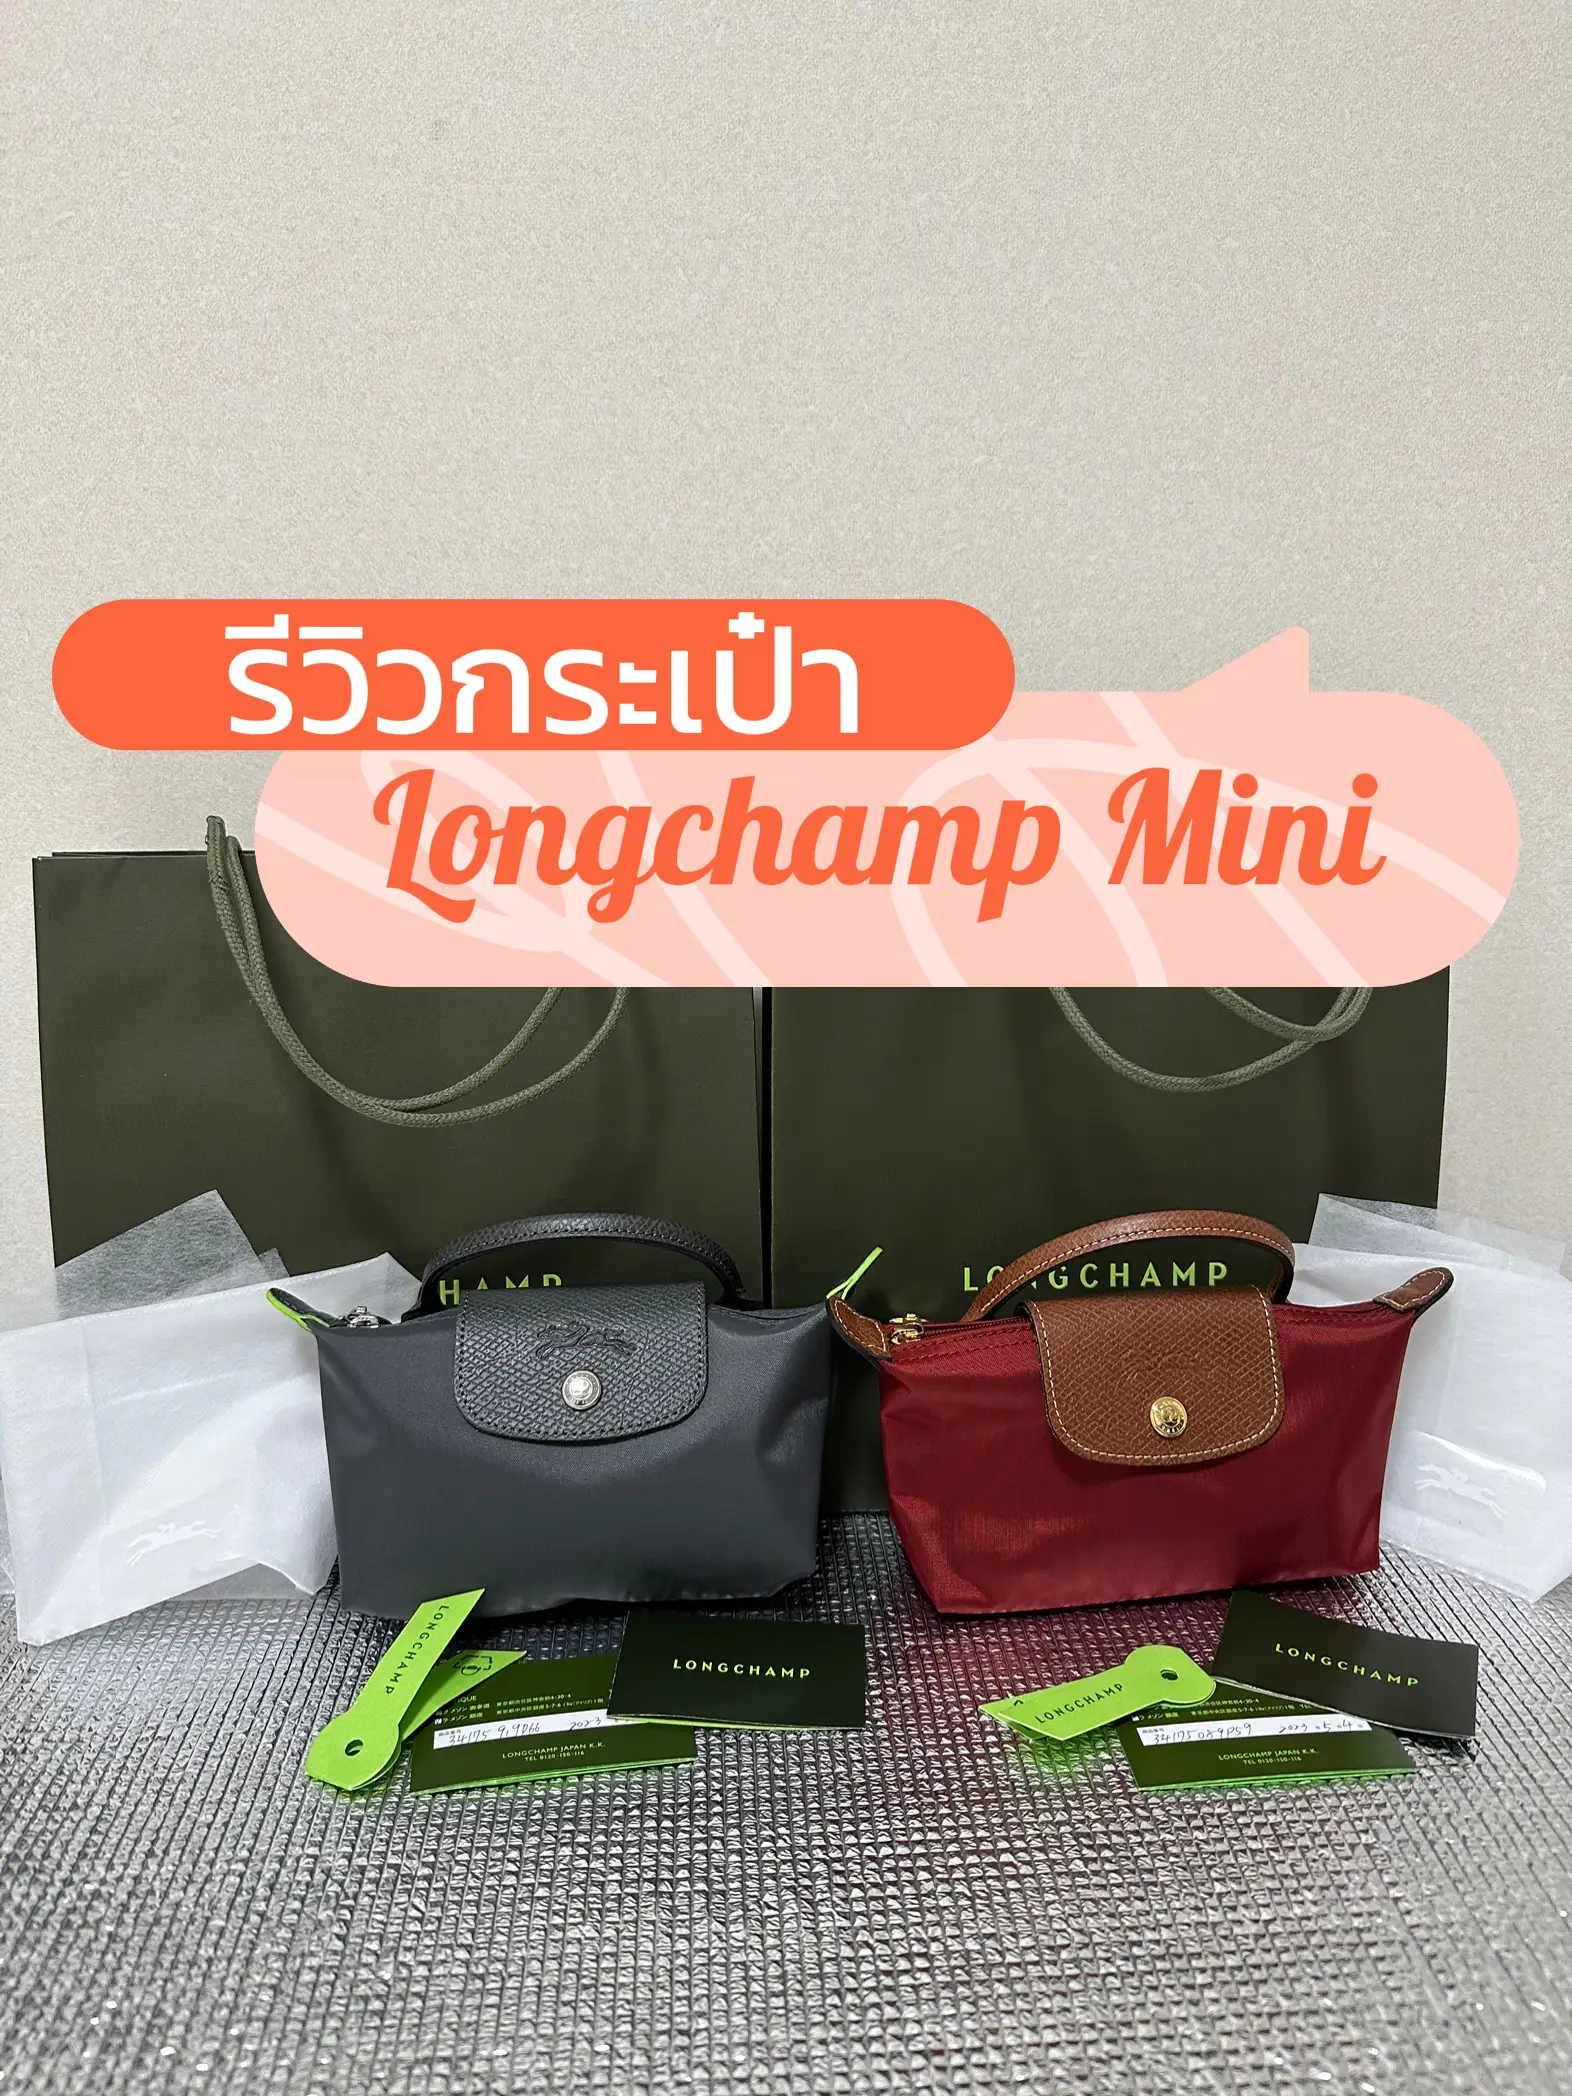 Longchamp Mini Pouch Review, Gallery posted by Mallory Lisa